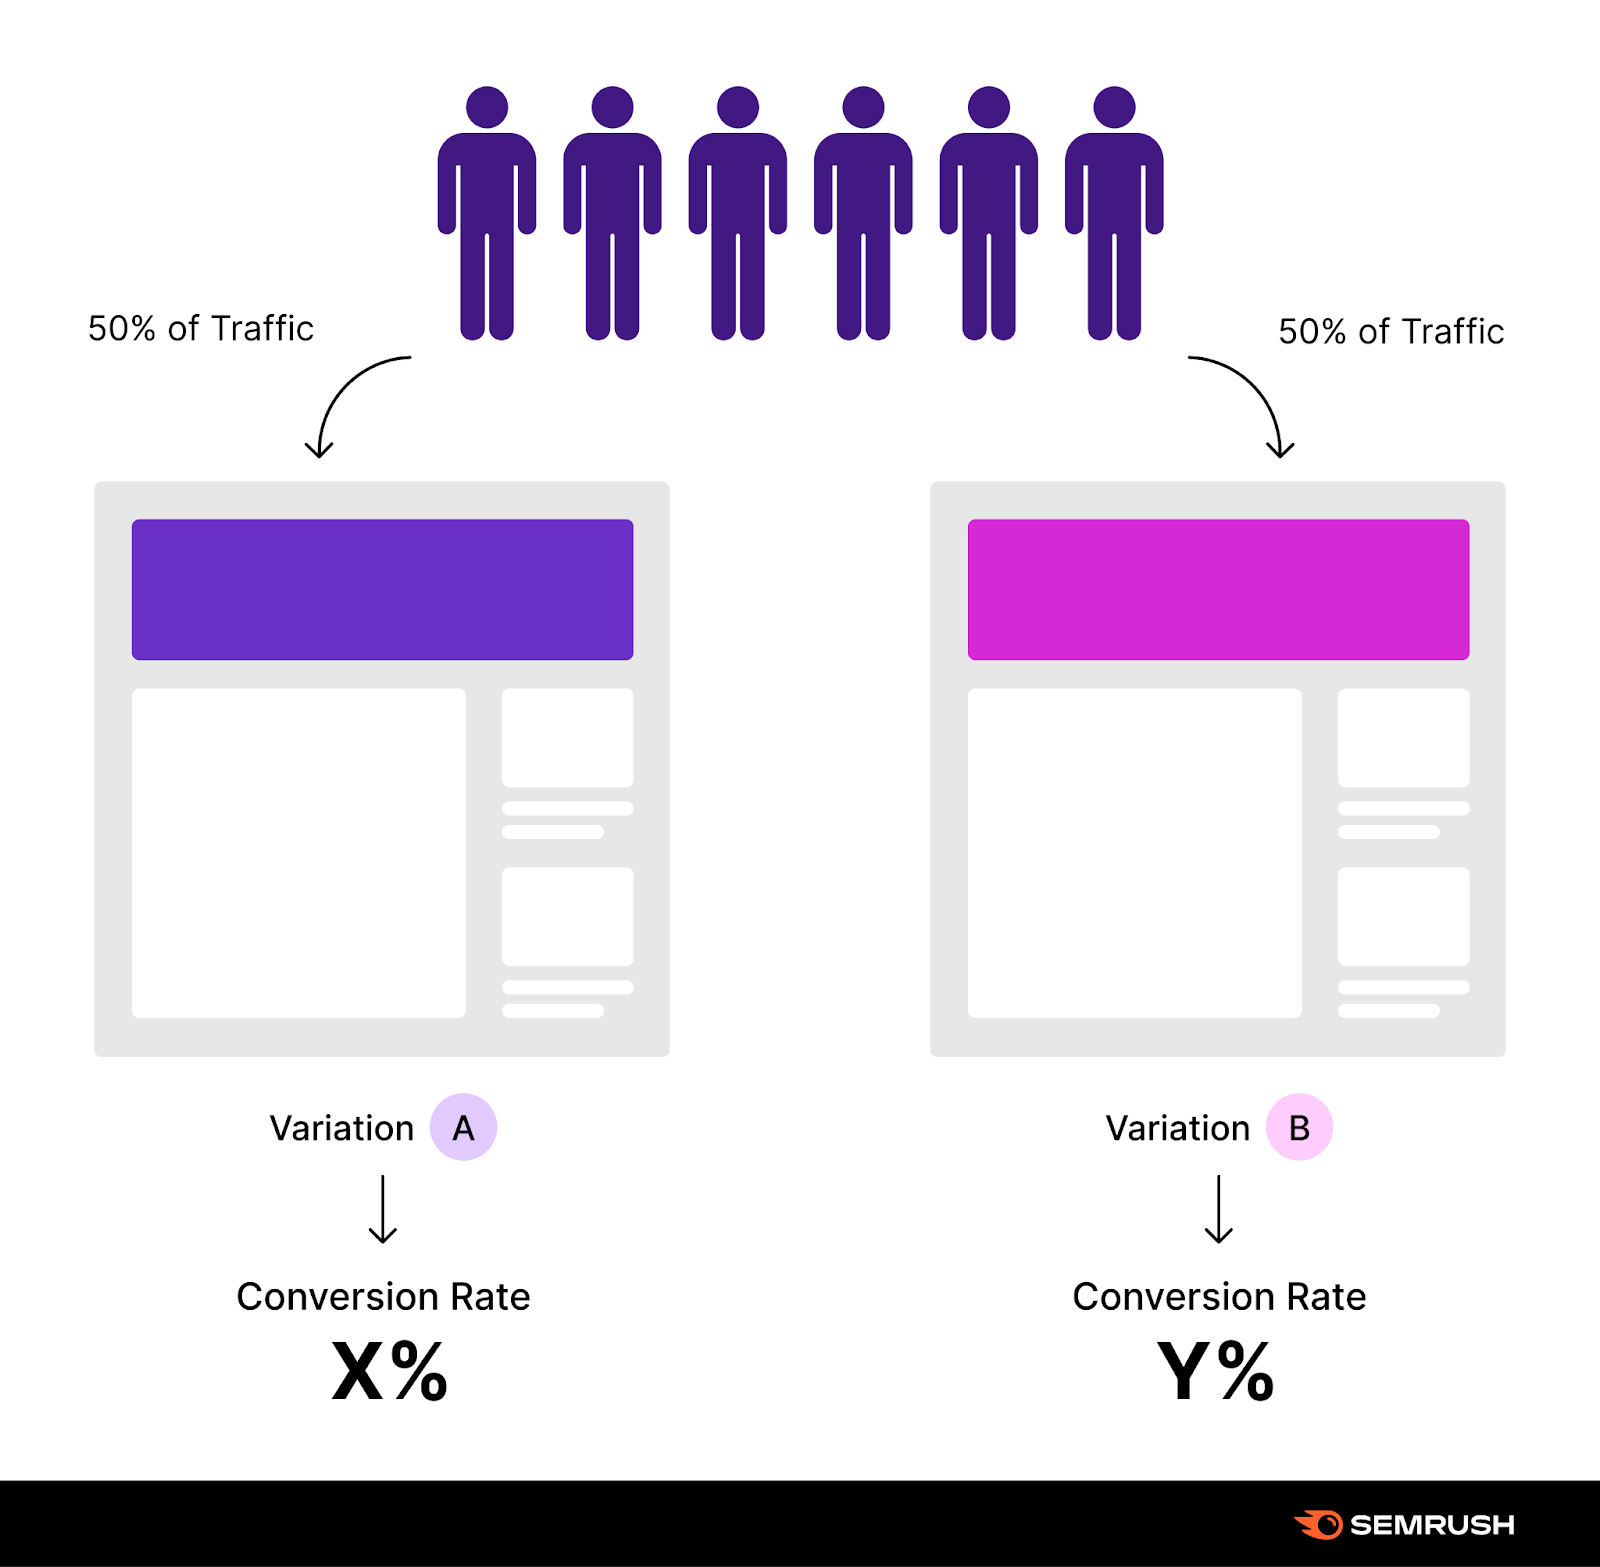 An infographic by Semrush showing an A/B test for two different page variations